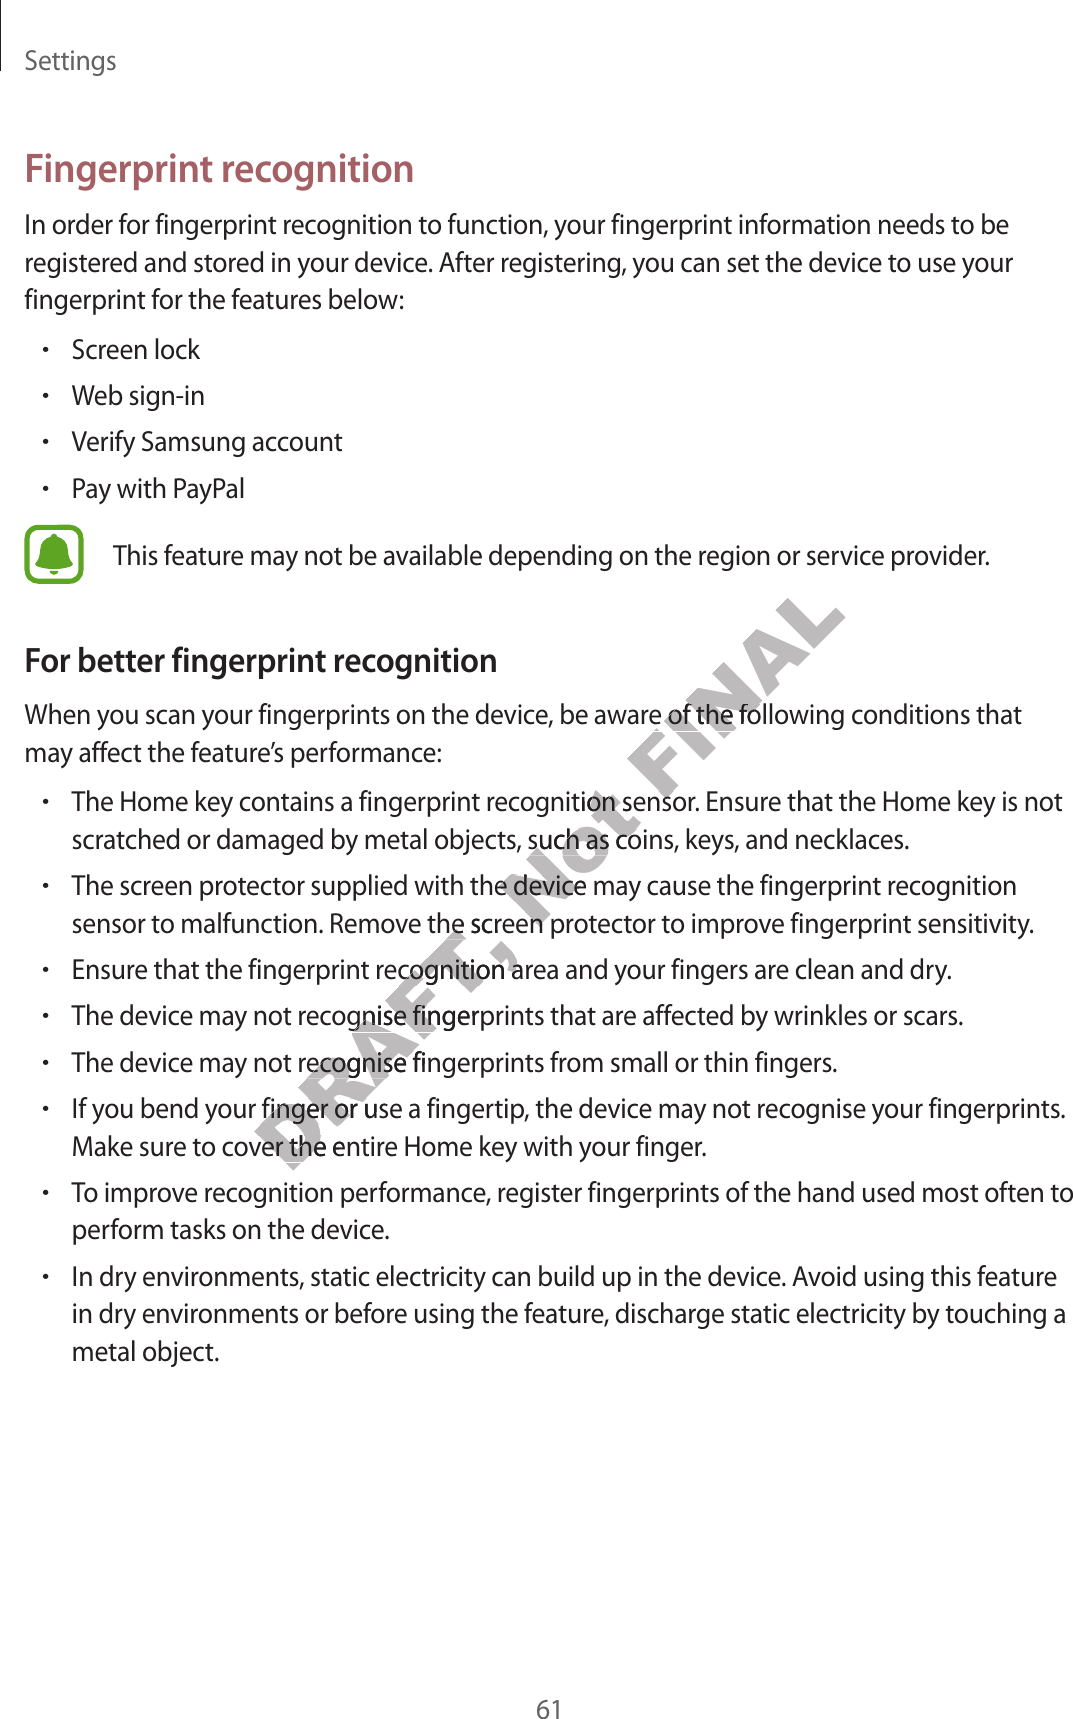 Settings61F ingerprin t r ec ognitionIn order for fingerprint r ecog nition to function, your fingerprint inf ormation needs t o be regist er ed and st or ed in y our device . A fter r egist ering , y ou can set the device t o use y our fingerprint for the f eatur es belo w:•Screen lock•Web sign-in•Verify Samsung account•P a y with PayPalThis f eatur e ma y not be a vailable depending on the r eg ion or service provider.For better fingerprint rec ognitionWhen you scan y our fingerprints on the device, be aware of the f ollowing c onditions that may aff ect the featur e’s performance:•The Home key contains a fingerprint r ec ognition sensor. Ensure that the Home key is not scratched or damaged b y metal objects, such as coins , key s , and necklaces.•The screen pr ot ector supplied with the device ma y cause the fingerprint rec og nition sensor to malfunction. Remove the screen pr ot ector to impr o v e fingerprint sensitivity.•Ensure that the fingerprint r ecog nition ar ea and y our fingers ar e clean and dry .•The device ma y not r ecog nise fingerprints that ar e aff ected by wrinkles or scars.•The device ma y not r ecog nise fingerprints fr om small or thin fingers .•If you bend your finger or use a fingertip, the device ma y not r ec ognise y our fingerprints . Make sure to co v er the entir e Home key with y our finger.•To improv e r ec og nition performance , r eg ister fingerprints of the hand used most often to perform tasks on the device.•In dry environments , static electricity can build up in the device. Avoid using this featur e in dry environmen ts or bef or e using the f ea tur e , dischar ge static electricity by touching a metal object.DRAFT, sensor to malfunction. Remove the screen pr ot ector to impr o v e fingerprint sensitivity.DRAFT, sensor to malfunction. Remove the screen pr ot ector to impr o v e fingerprint sensitivity.Ensure that the fingerprint r ecog nition ar ea and y our fingers ar e clean and dry .DRAFT, Ensure that the fingerprint r ecog nition ar ea and y our fingers ar e clean and dry .The device ma y not r ecog nise fingerprints that ar e aff ected by wrinkles or scars.DRAFT, The device ma y not r ecog nise fingerprints that ar e aff ected by wrinkles or scars.The device ma y not r ecog nise fingerprints fr om small or thin fingers .DRAFT, The device ma y not r ecog nise fingerprints fr om small or thin fingers .DRAFT, If you bend your finger or use a fingertip, the device ma y not r ec ognise y our fingerprints . DRAFT, If you bend your finger or use a fingertip, the device ma y not r ec ognise y our fingerprints . Make sure to co v er the entir e Home key with y our finger.DRAFT, Make sure to co v er the entir e Home key with y our finger.To improv e r ec og nition performance , r eg ister fingerprints of the hand used most often to DRAFT, To improv e r ec og nition performance , r eg ister fingerprints of the hand used most often to Not The Home key contains a fingerprint r ec ognition sensor. Ensure that the Home key is not Not The Home key contains a fingerprint r ec ognition sensor. Ensure that the Home key is not scratched or damaged b y metal objects, such as coins , key s , and necklaces.Not scratched or damaged b y metal objects, such as coins , key s , and necklaces.The screen pr ot ector supplied with the device ma y cause the fingerprint rec og nition Not The screen pr ot ector supplied with the device ma y cause the fingerprint rec og nition sensor to malfunction. Remove the screen pr ot ector to impr o v e fingerprint sensitivity.Not sensor to malfunction. Remove the screen pr ot ector to impr o v e fingerprint sensitivity.FINALWhen you scan y our fingerprints on the device, be aware of the f ollowing c onditions that FINALWhen you scan y our fingerprints on the device, be aware of the f ollowing c onditions that The Home key contains a fingerprint r ec ognition sensor. Ensure that the Home key is not FINALThe Home key contains a fingerprint r ec ognition sensor. Ensure that the Home key is not 